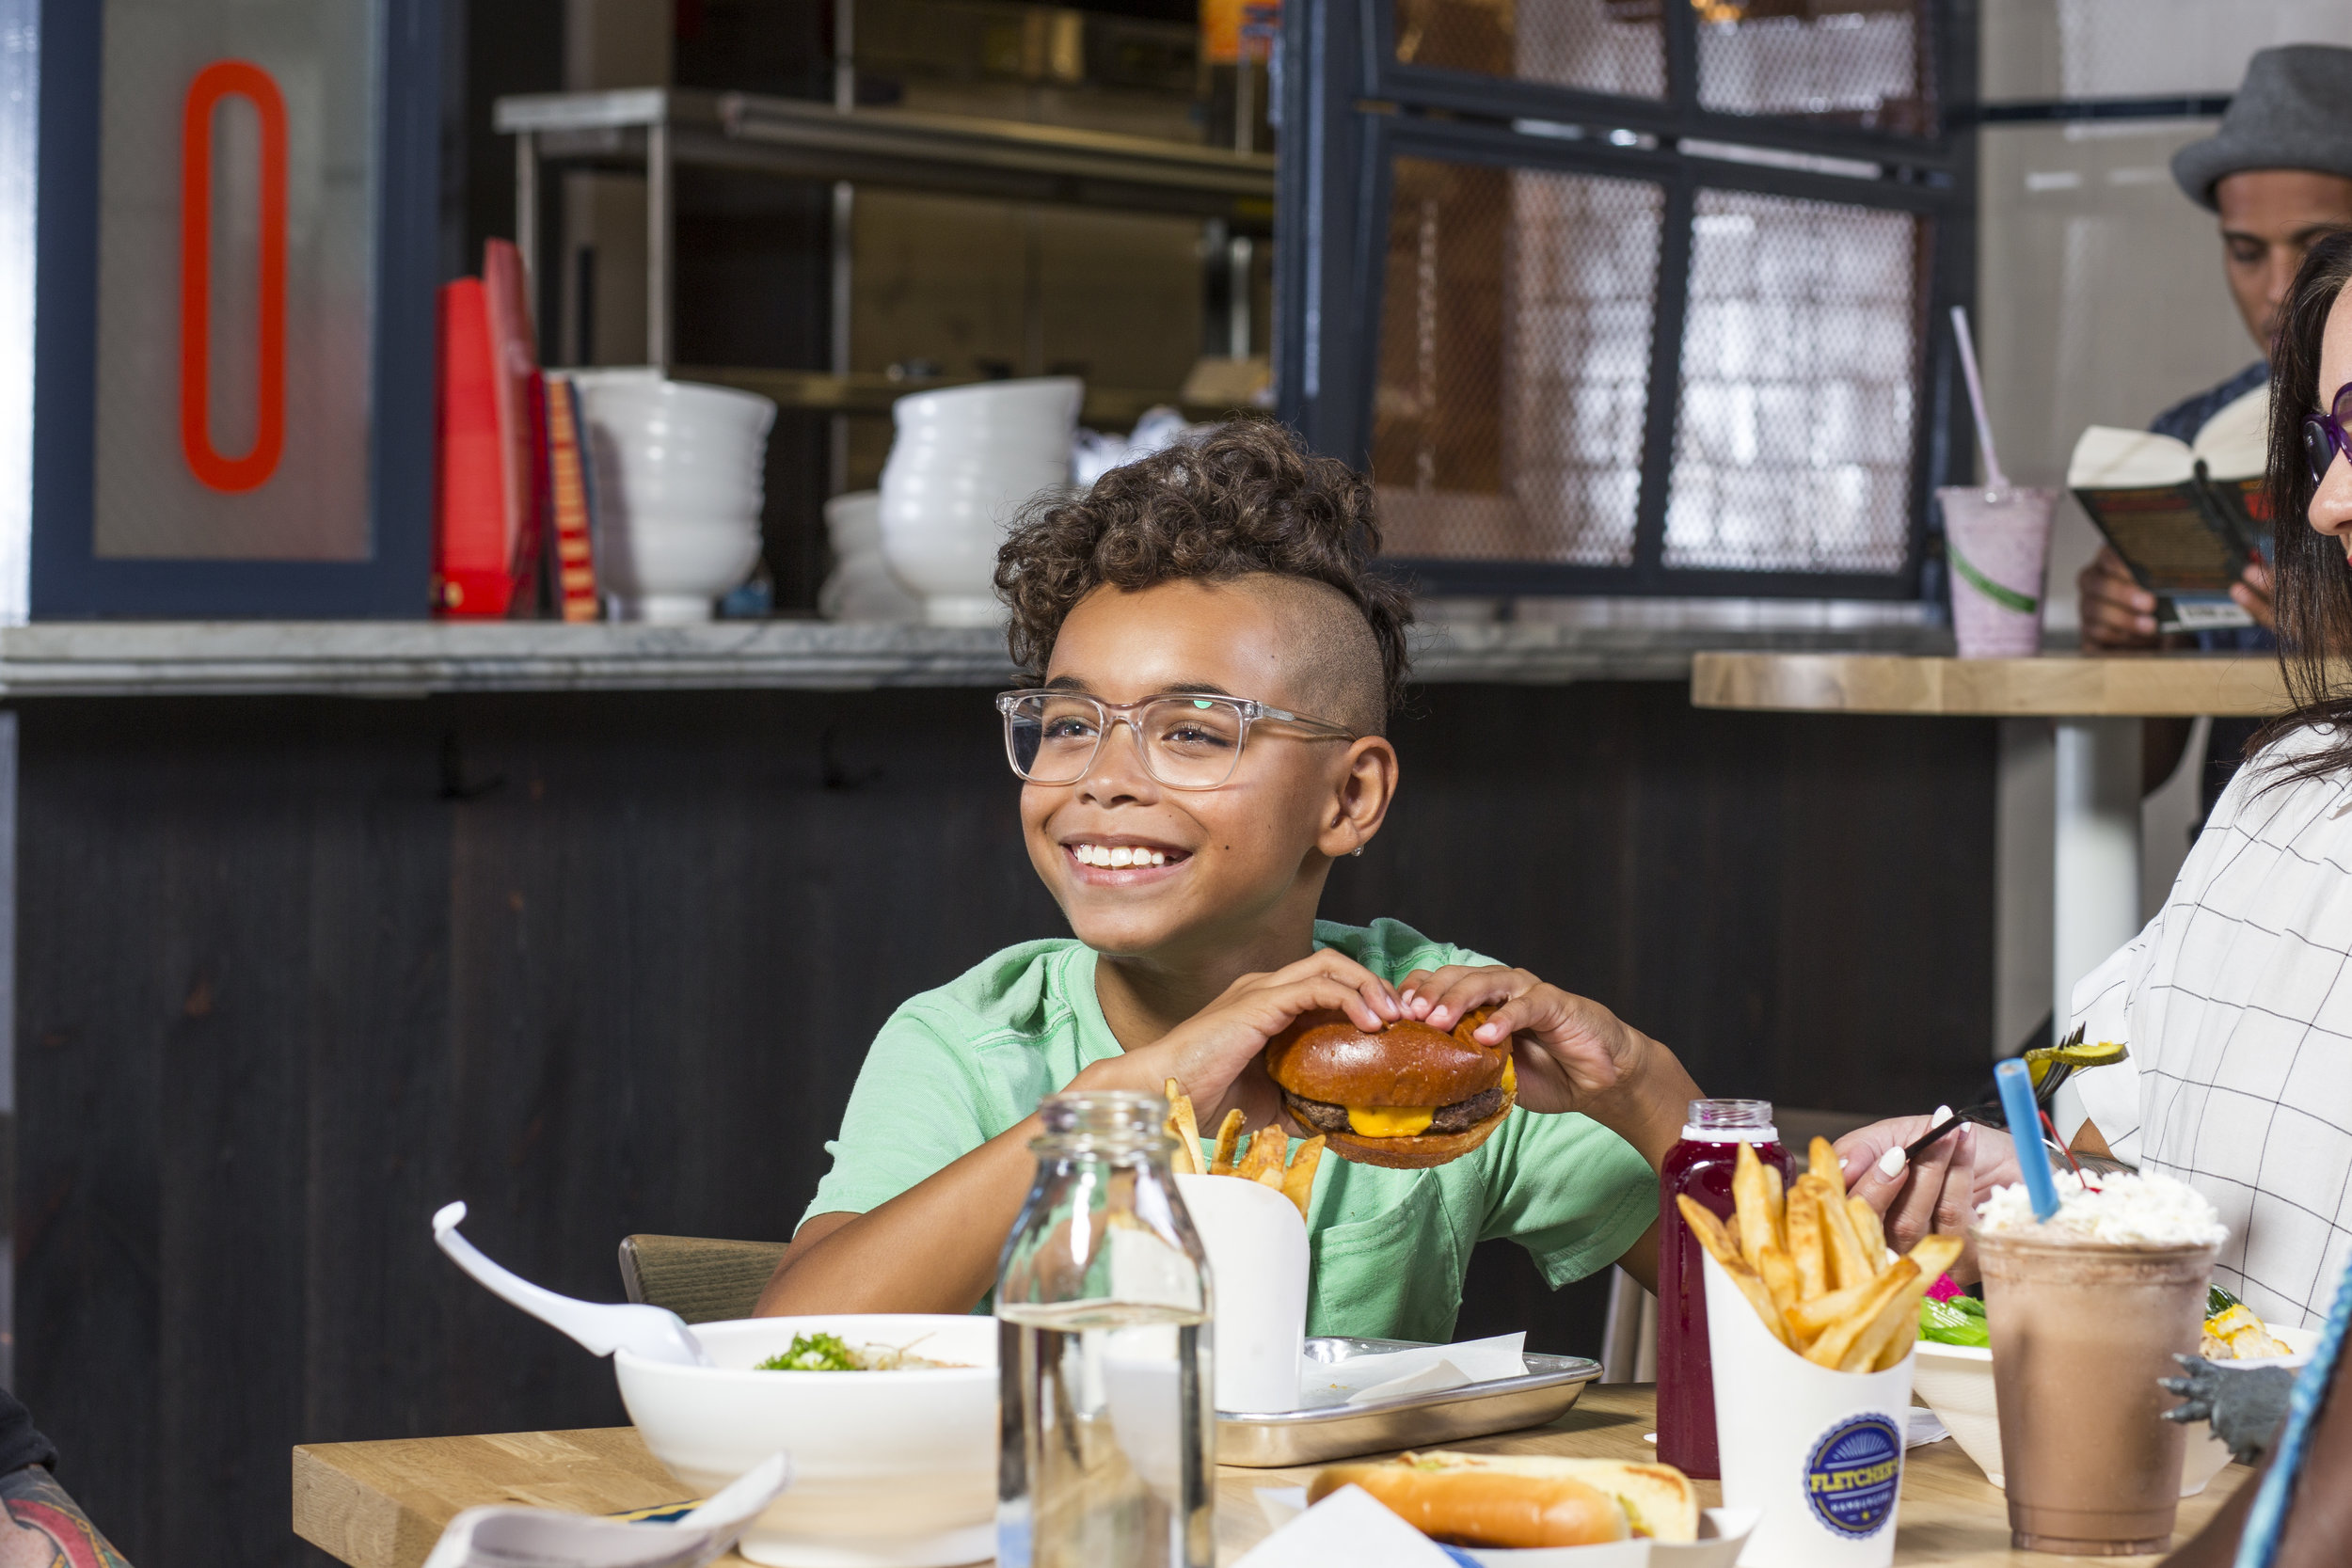 austin-texas-lifestyle-photographer-young-boy-with-burger